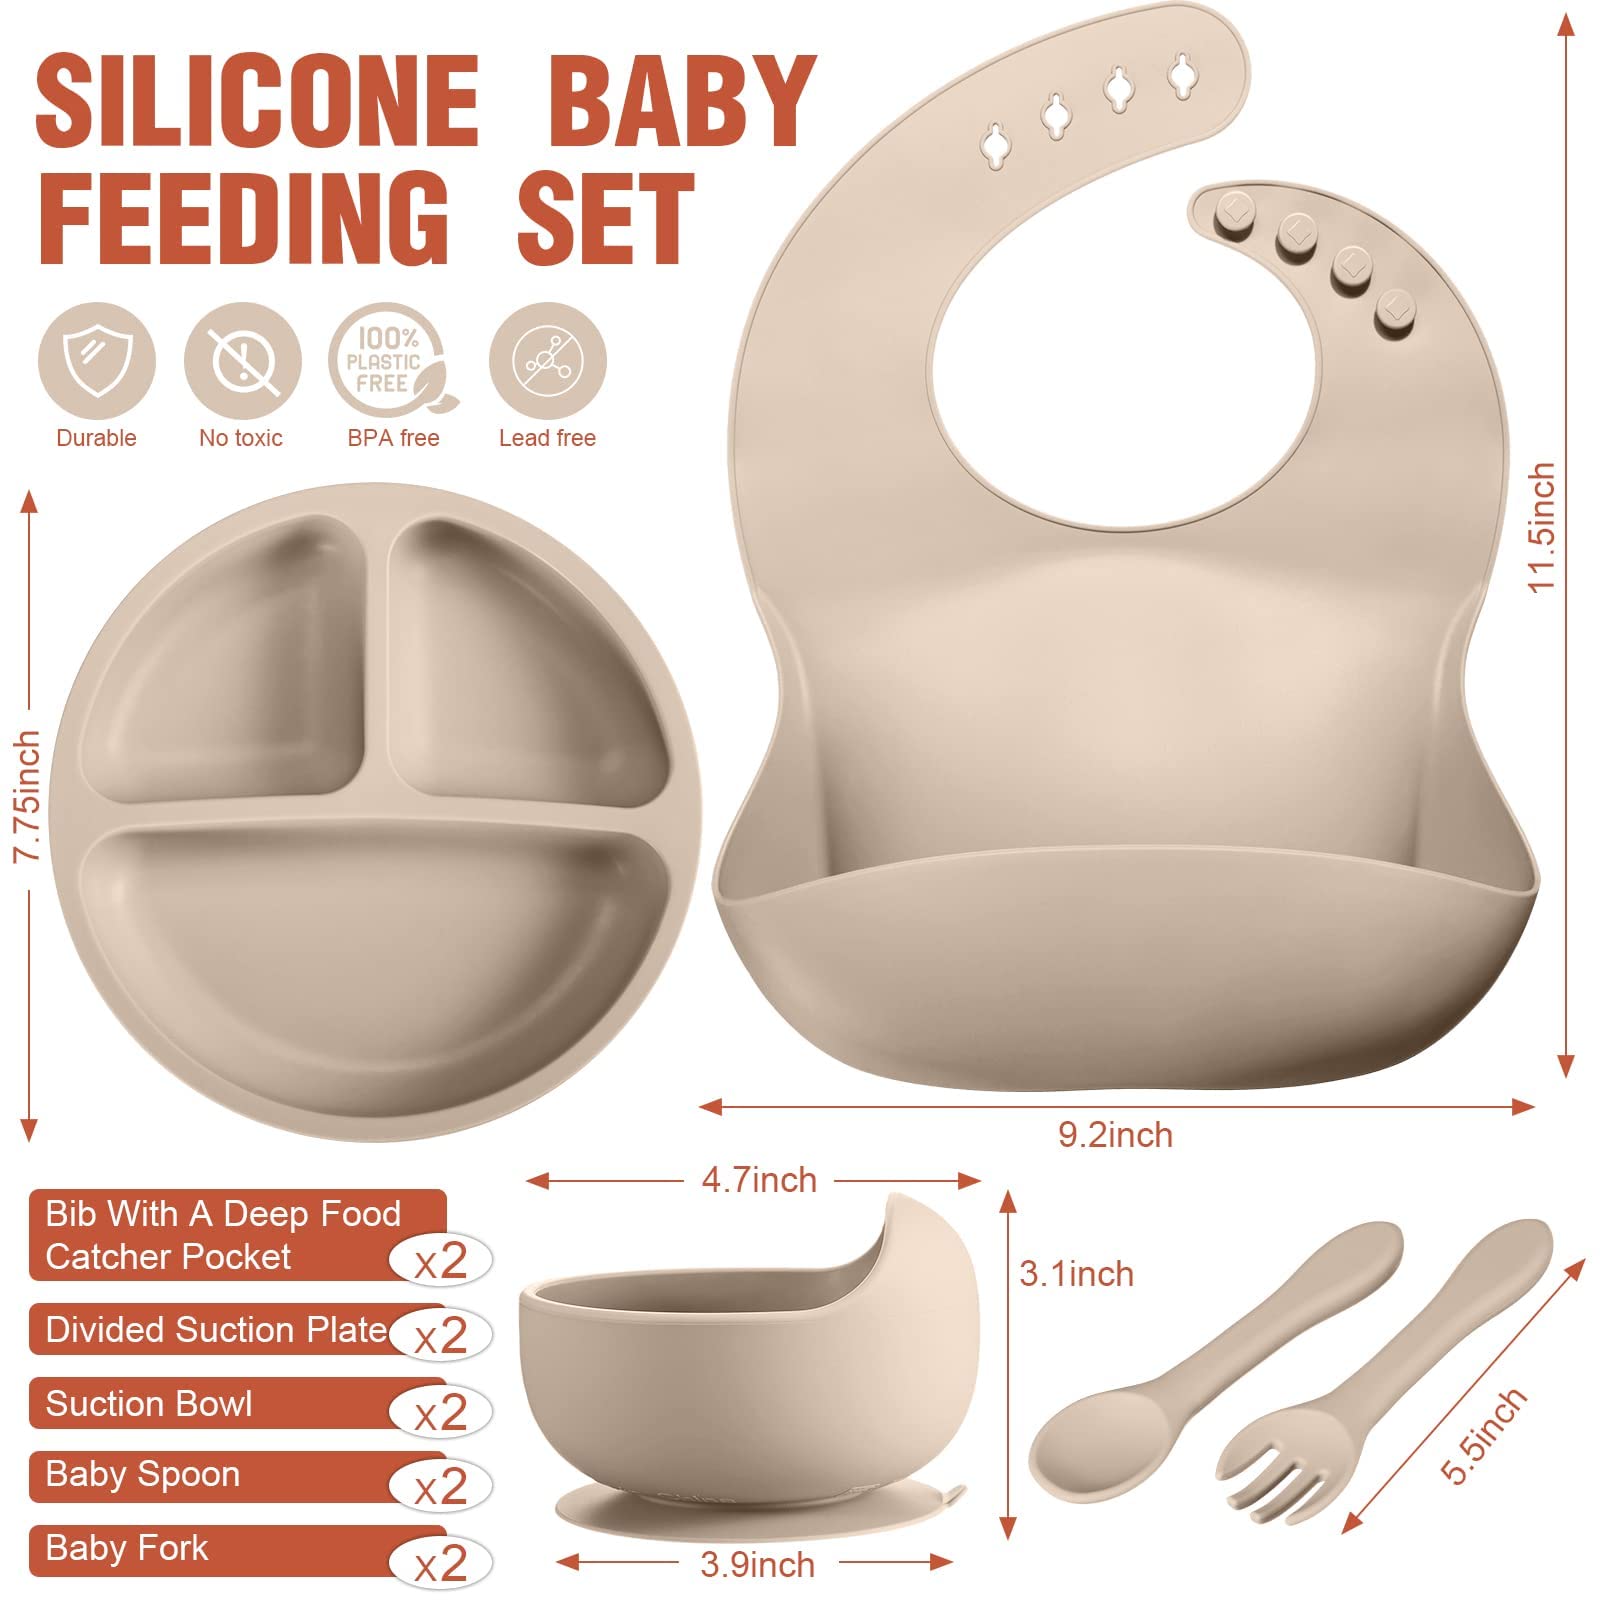 Potchen 10 Pack Silicone Baby Feeding Set, Toddlers Led Weaning Supplies with Suction Bowl Divided Plate Adjustable Bib Soft Spoon Fork, Infant Self Eating Utensil Set (Beige, Orange)